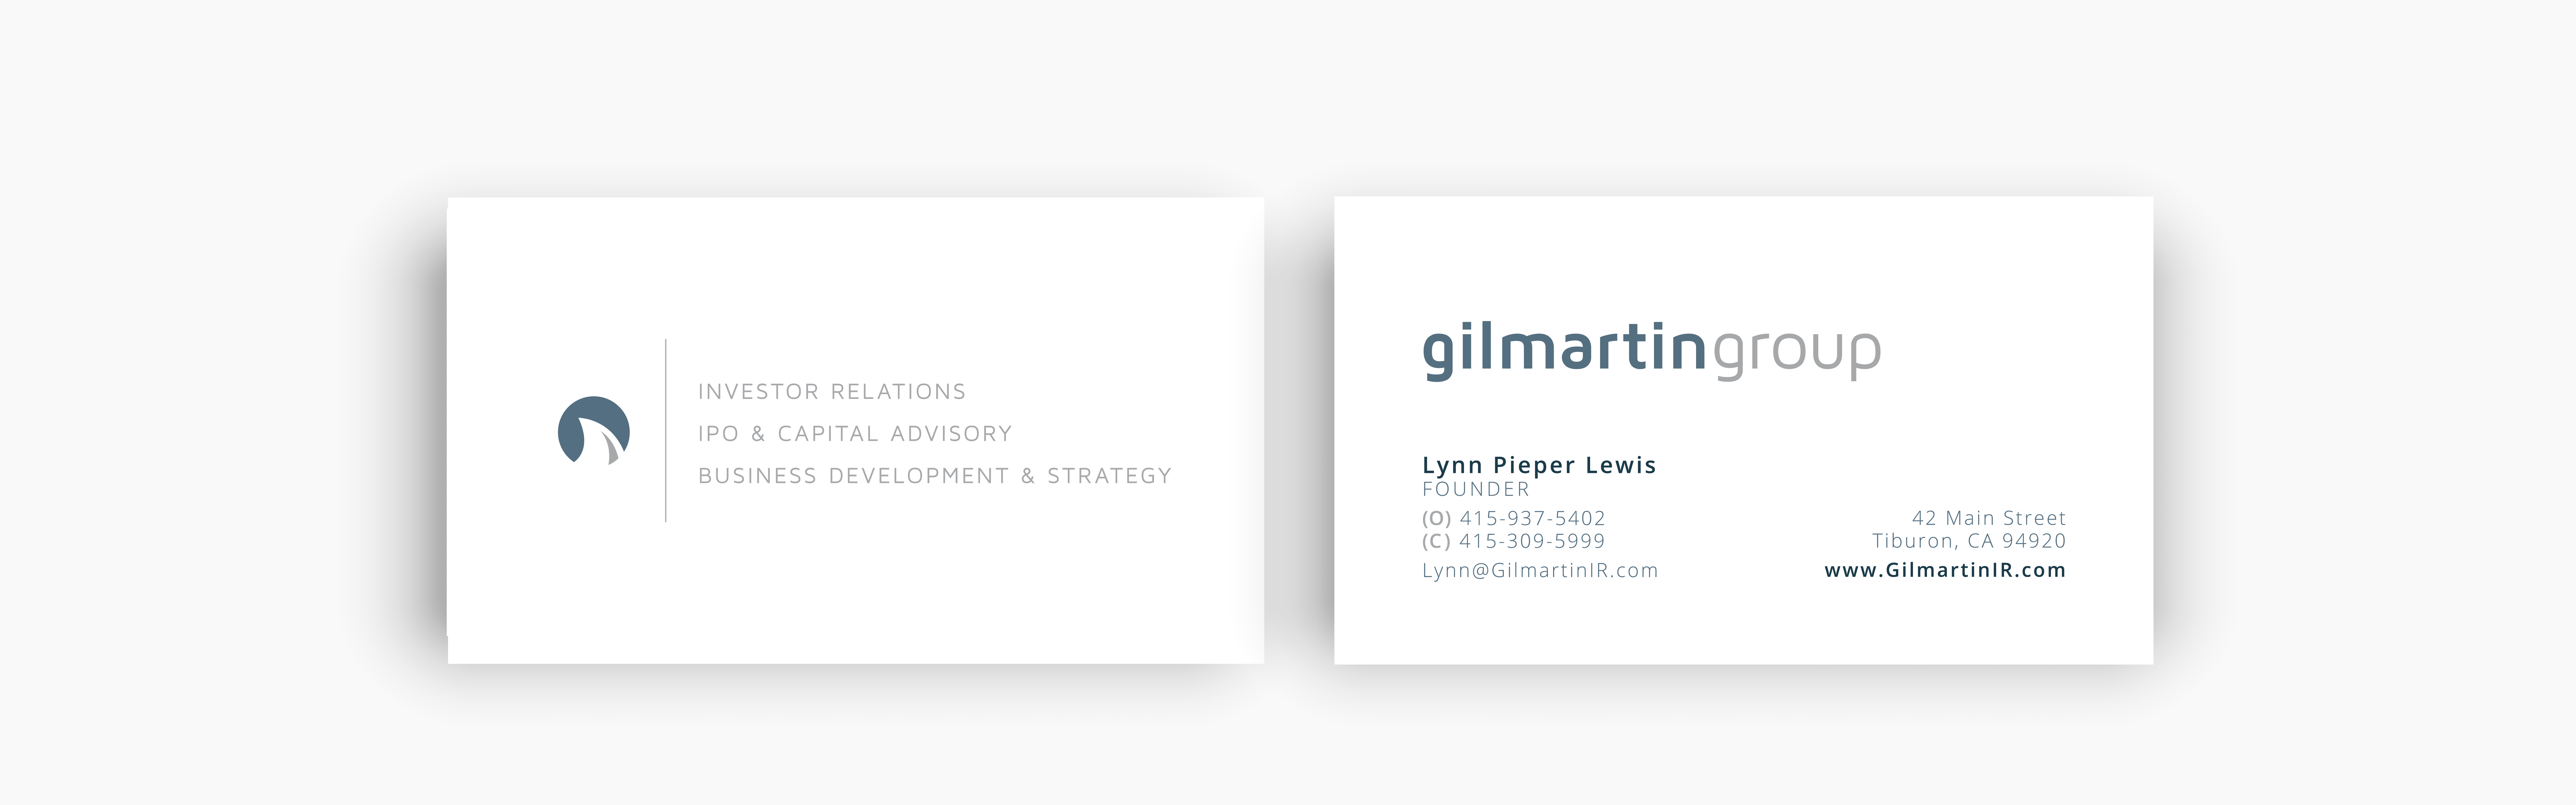 Two business cards are displayed side by side on a plain background; one for Gilmartin Group investor relations and the other for a founder, including contact details and logos.